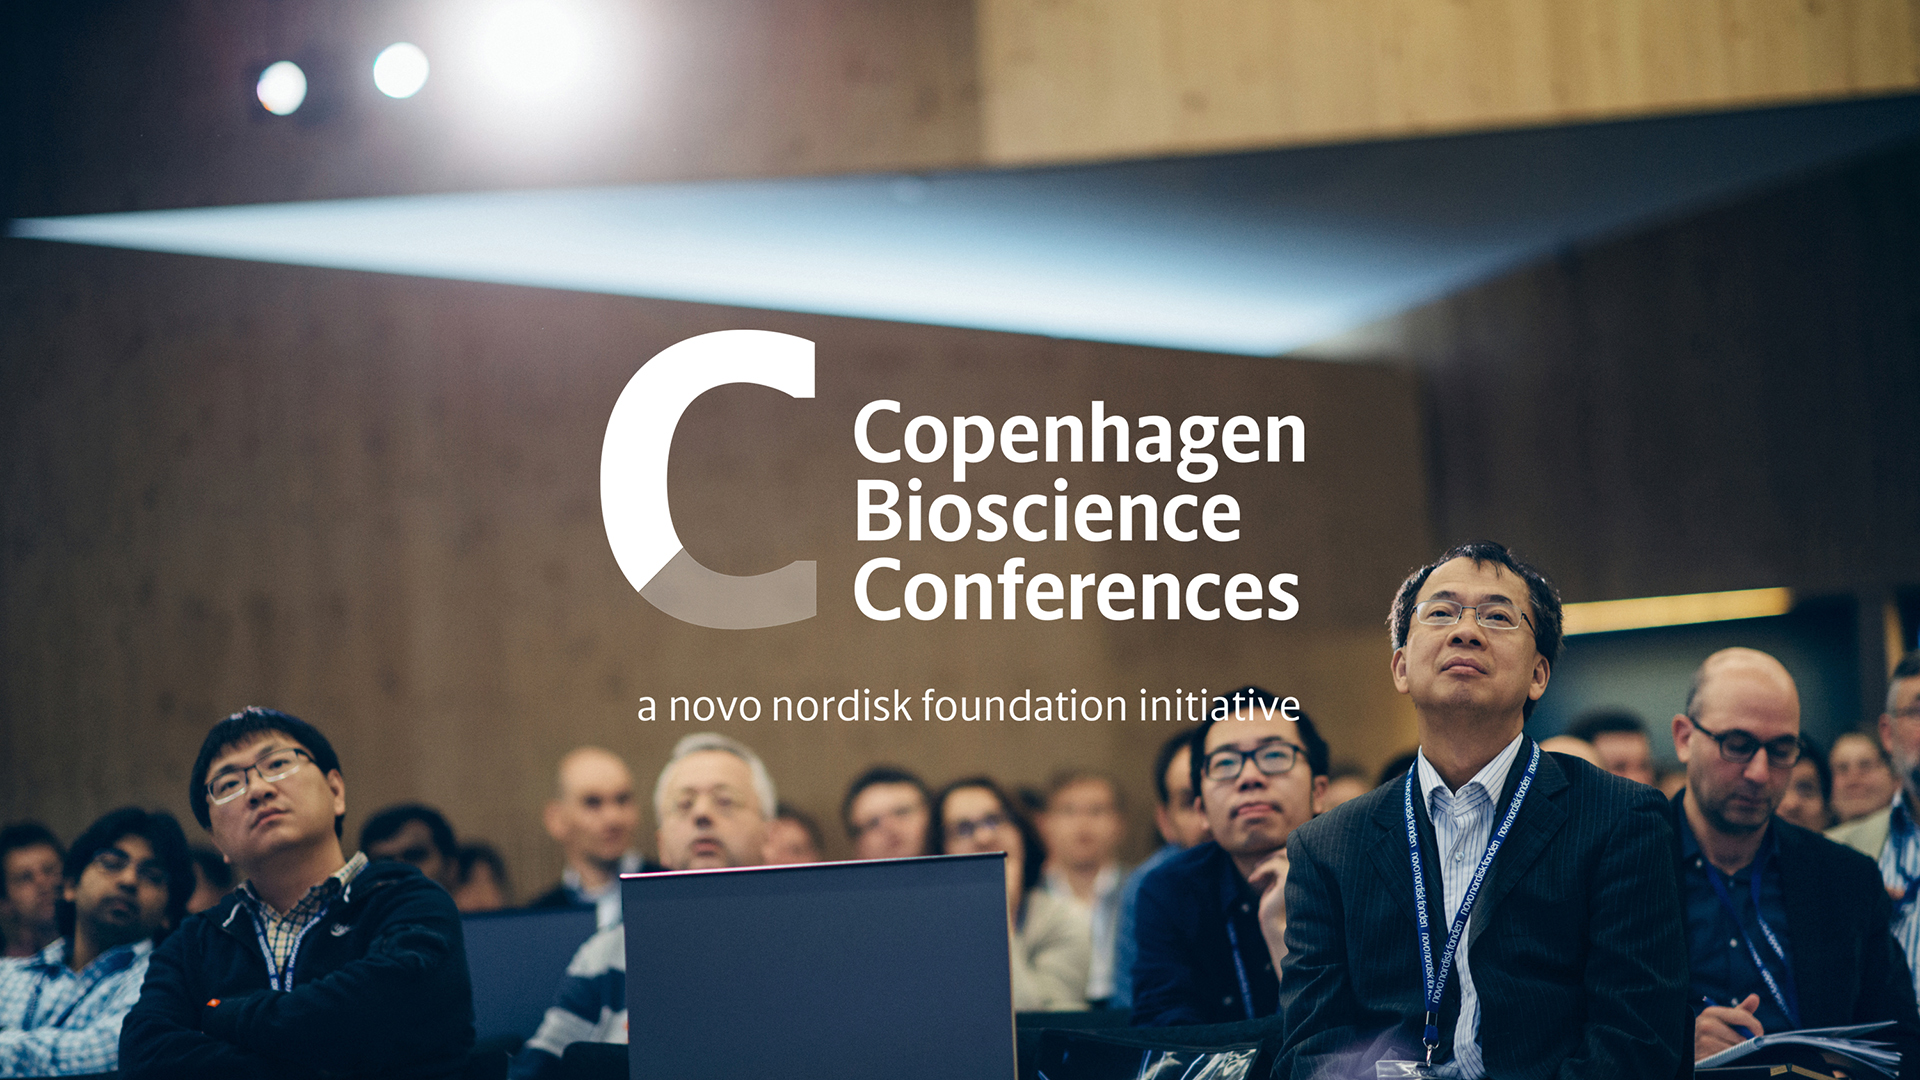 Copenhagen Bioscience Conferences Are they really that good